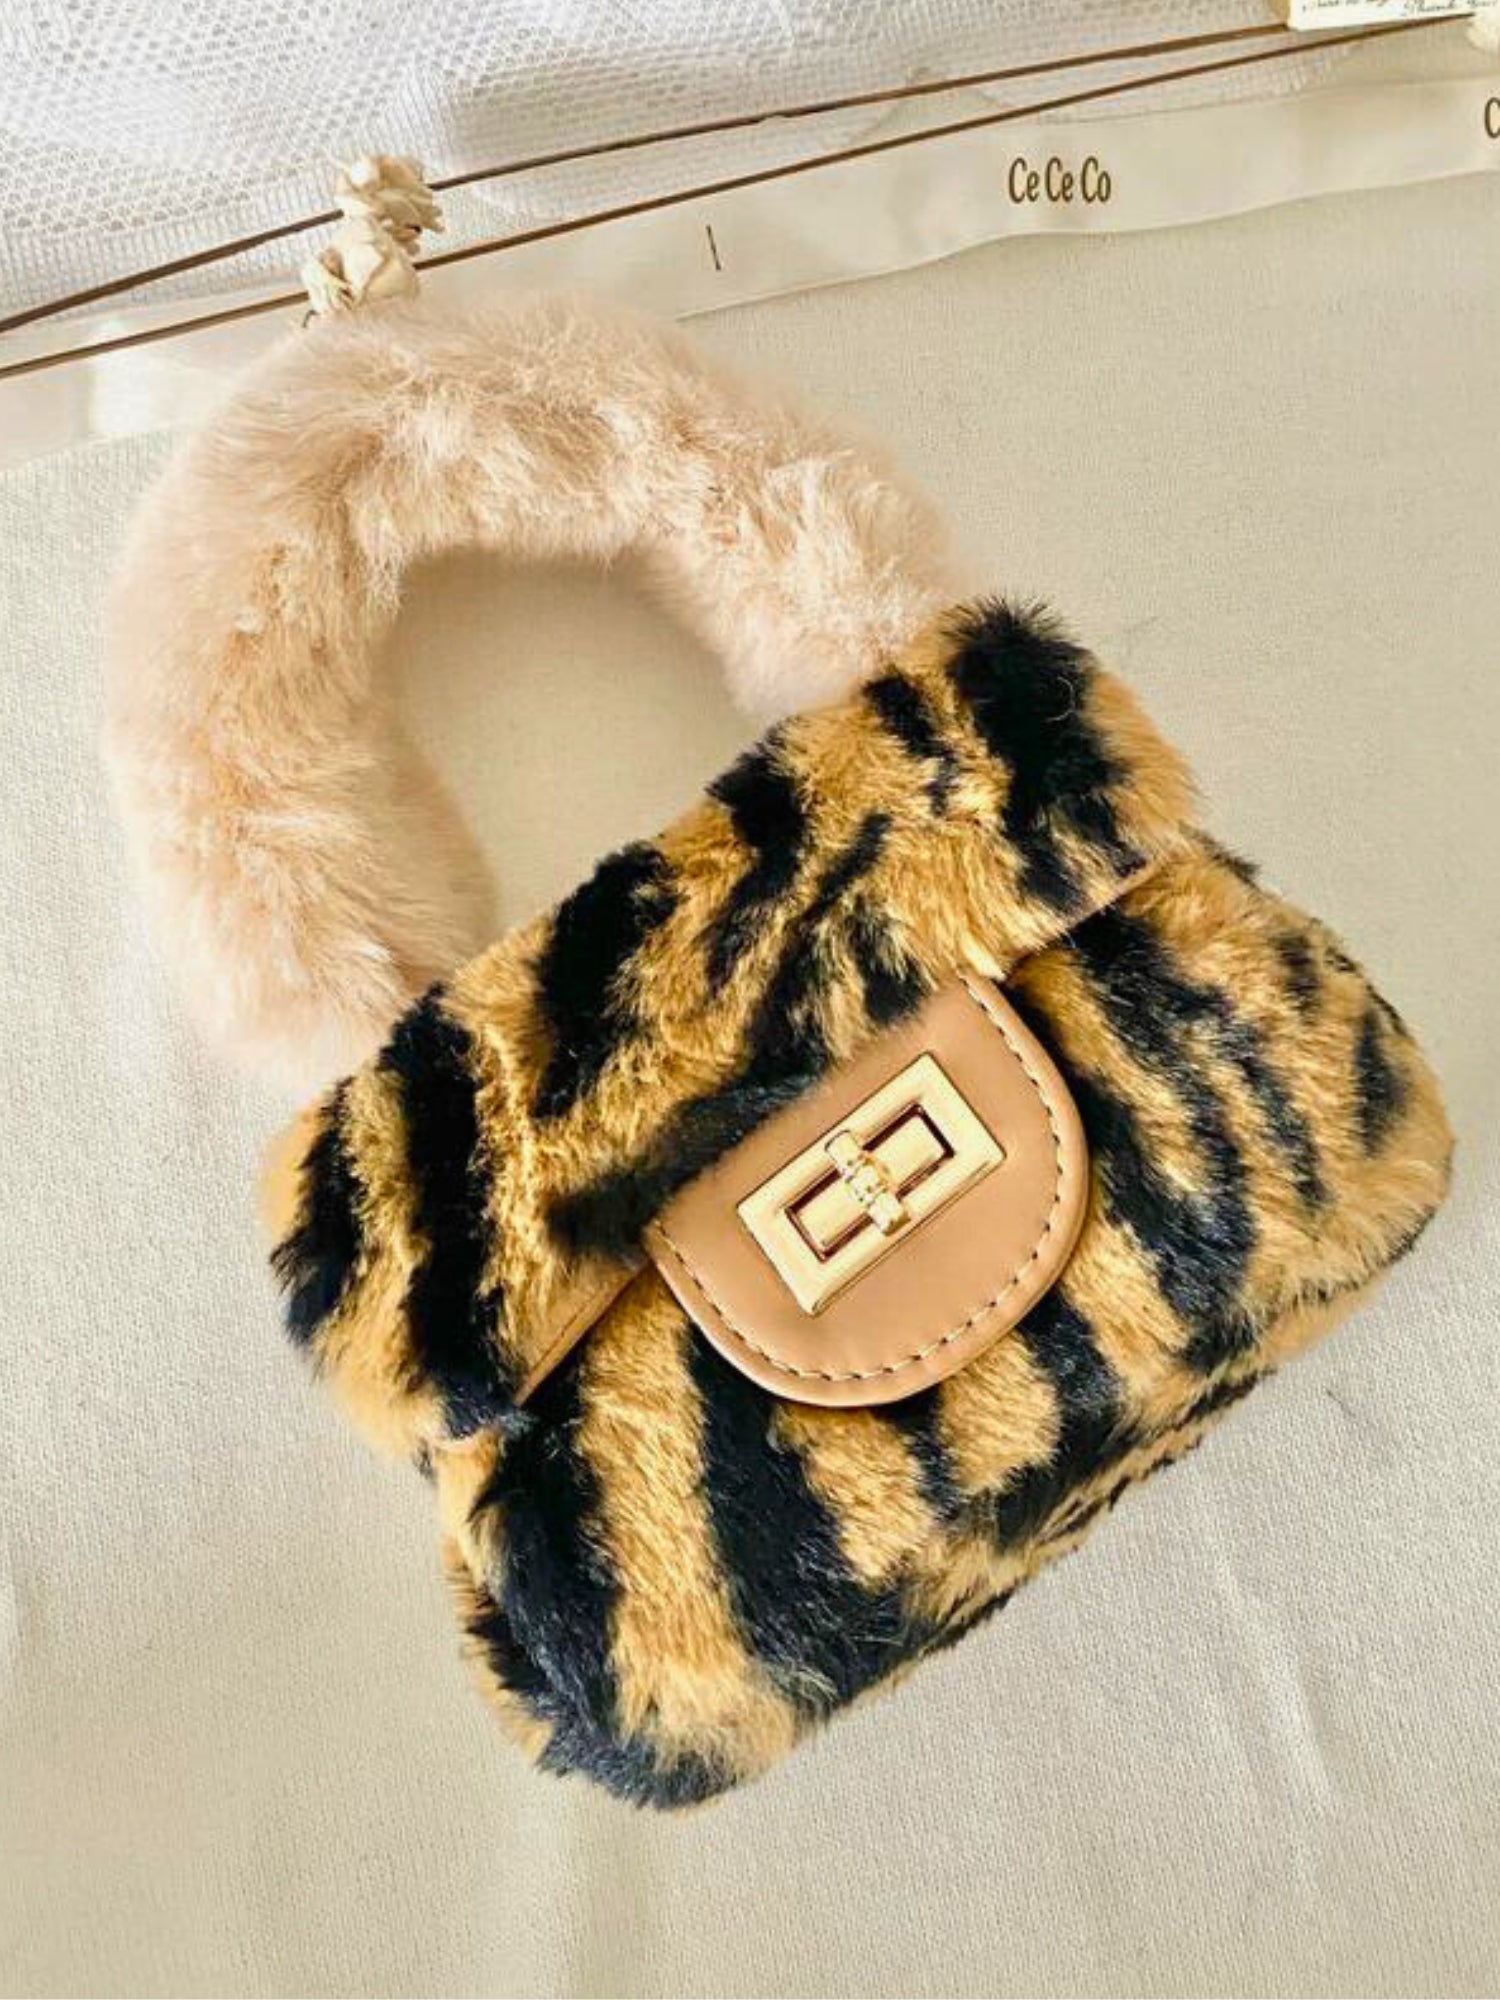 The Leopard Faux Fur Micro Handbag, Purse, Cececo - Ivory Sheep Collection Limited